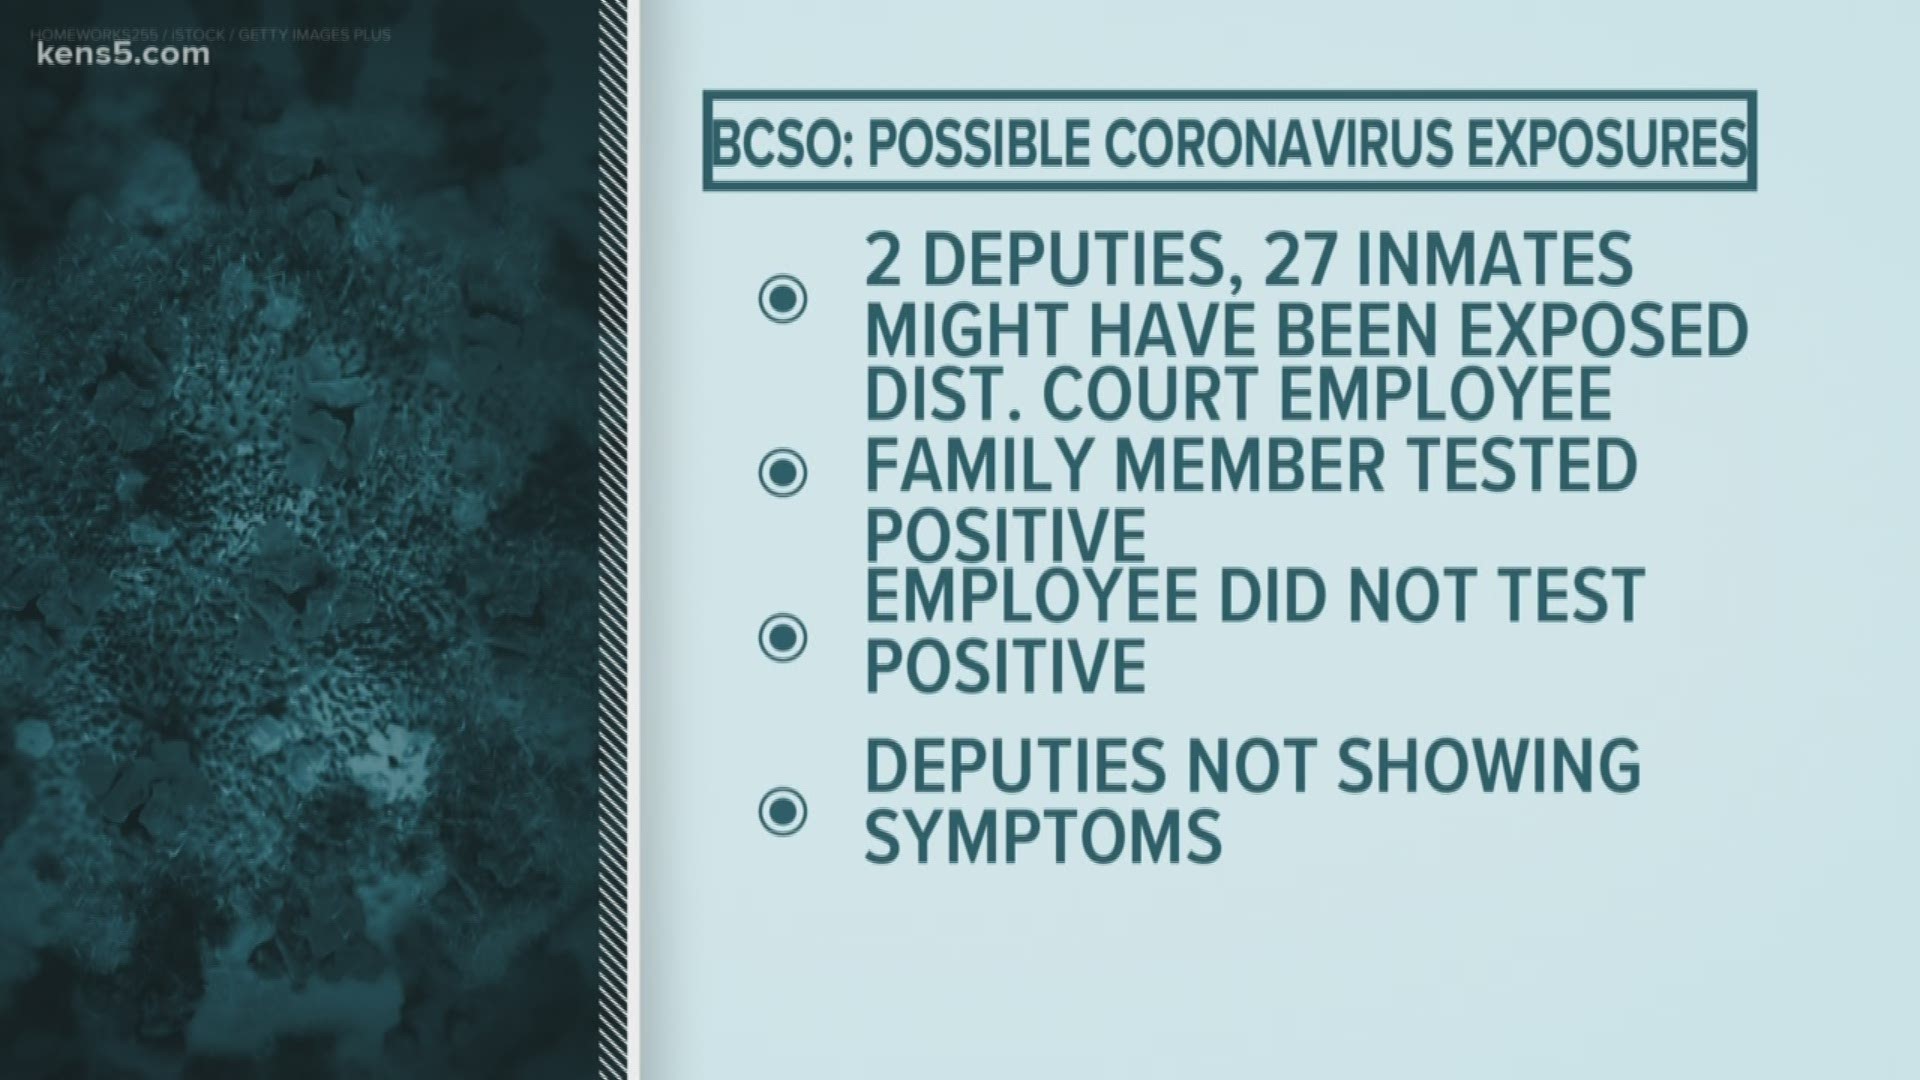 Authorities say deputies haven't shown symptoms of the coronavirus, but the family member of a county employee recently tested positive.